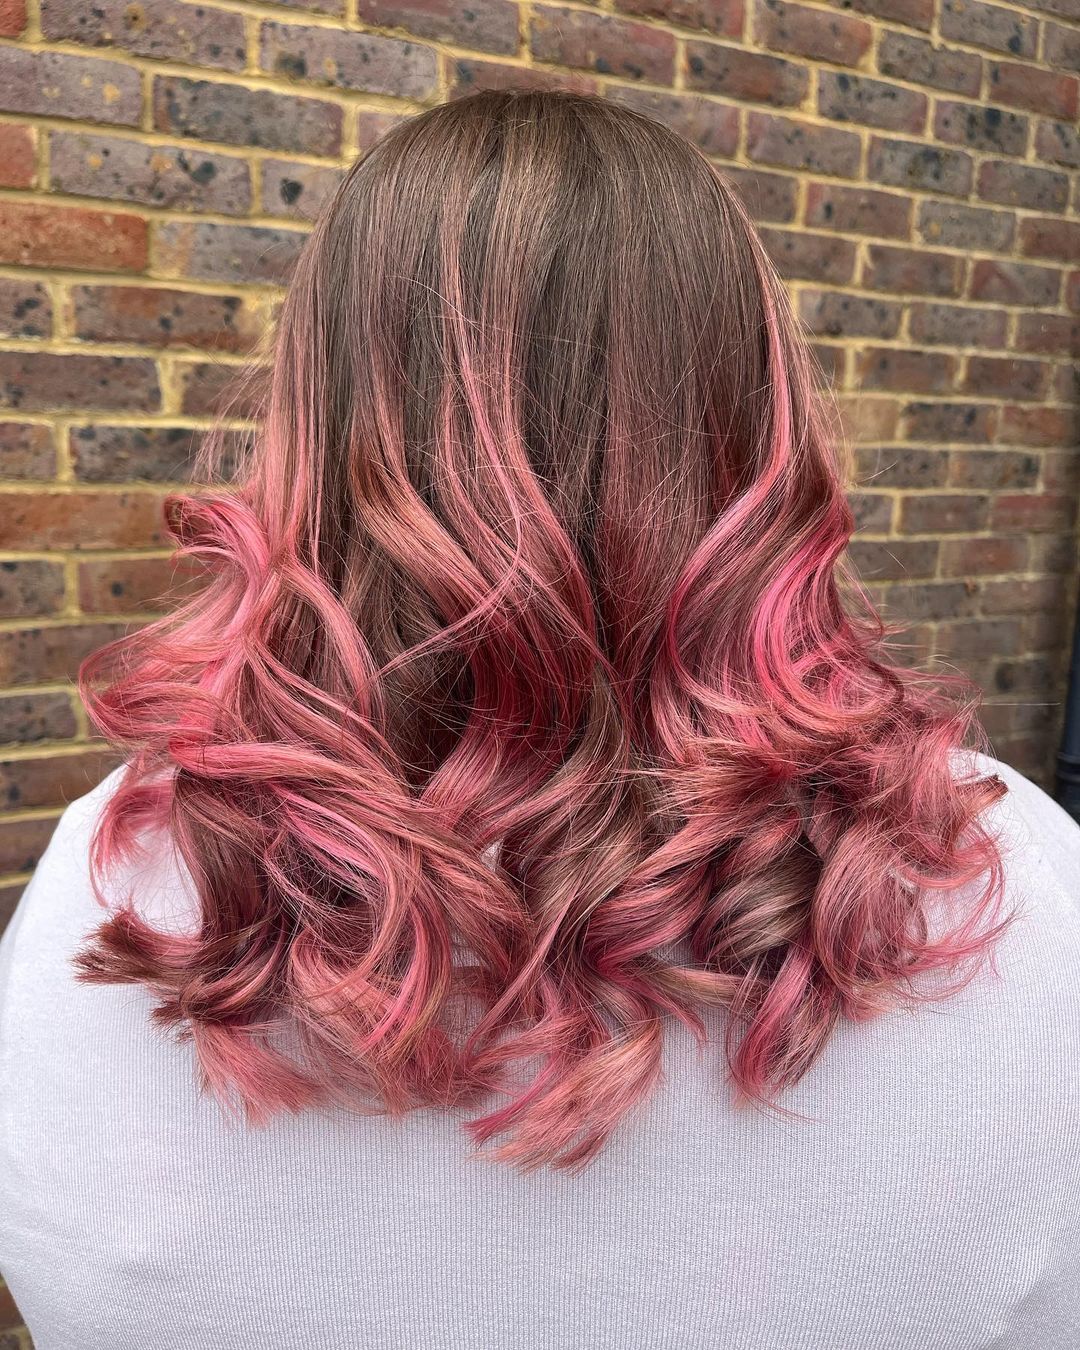 pink ombre hair color 136 Ombre pink hair blonde | Pastel pink ombre hair | Pink balayage Hair Pink Ombre Hair Color for Women